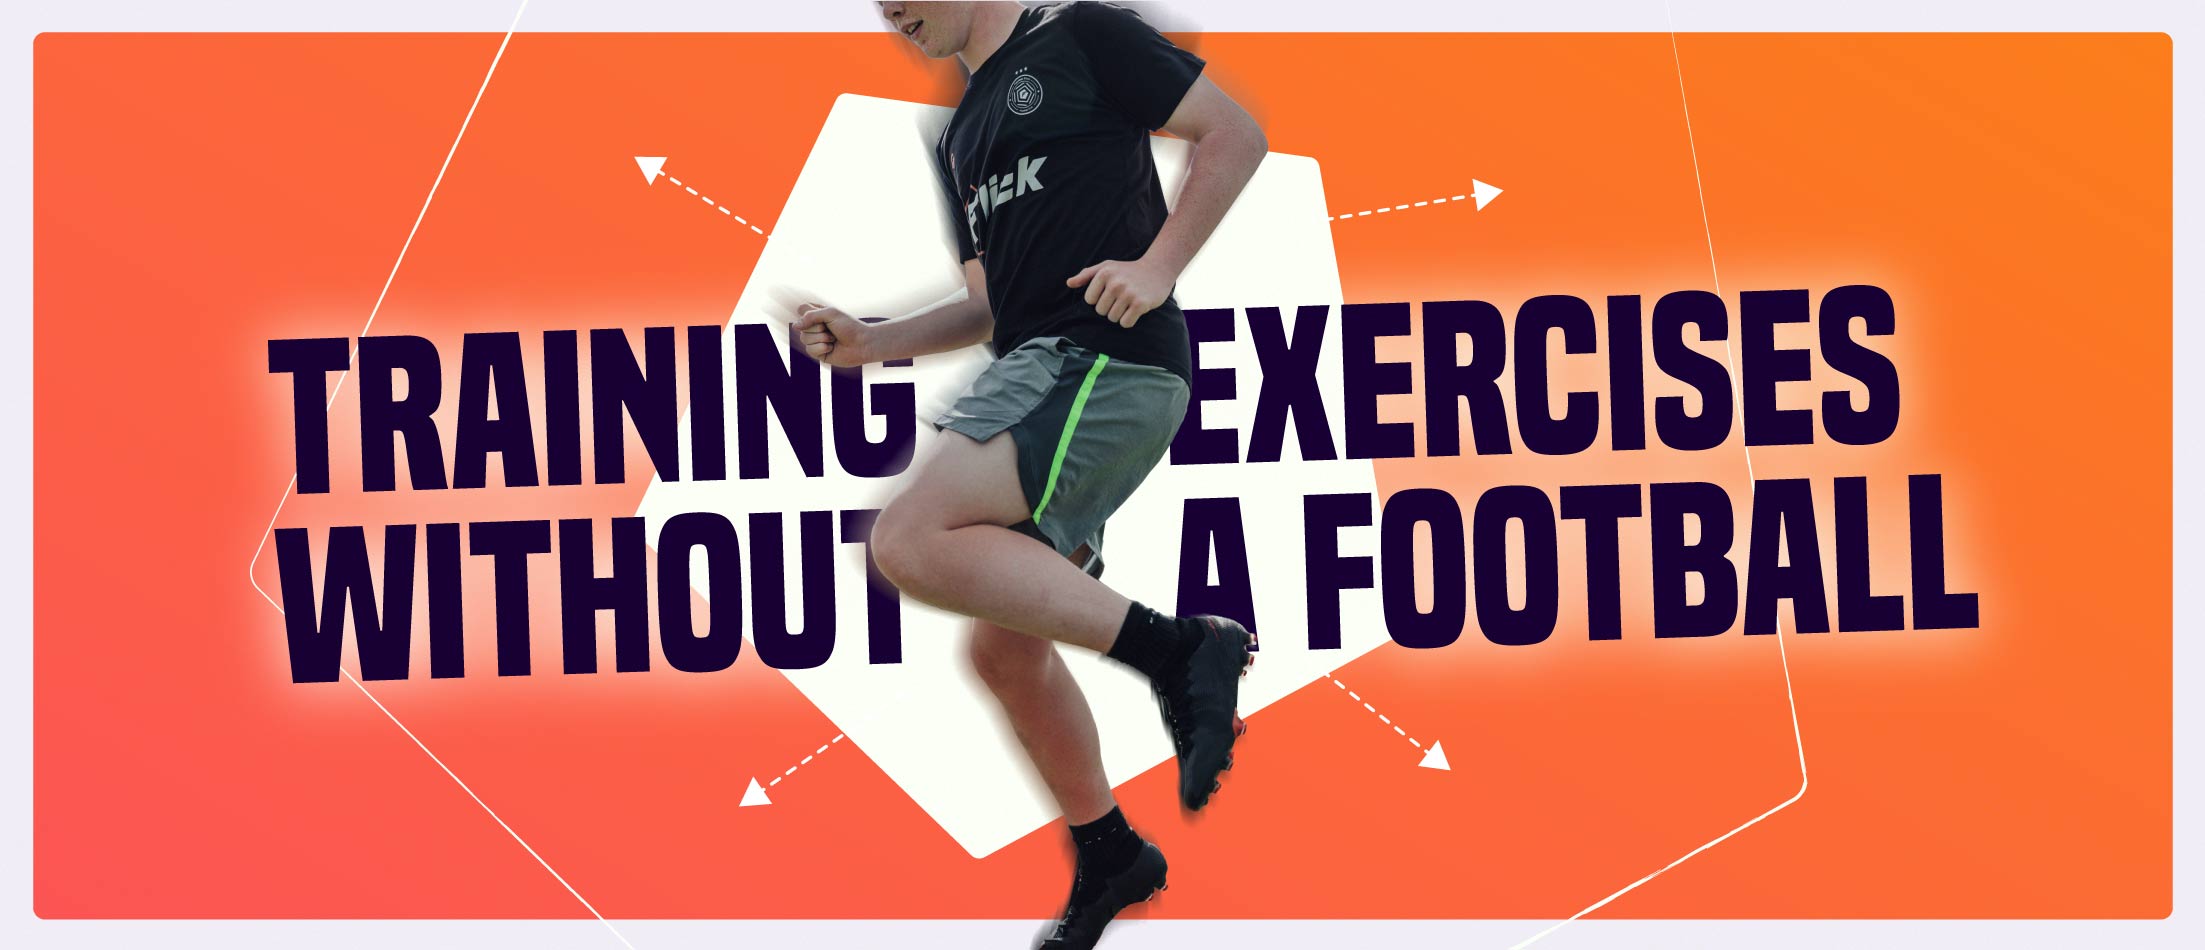 Training Exercises without a Football